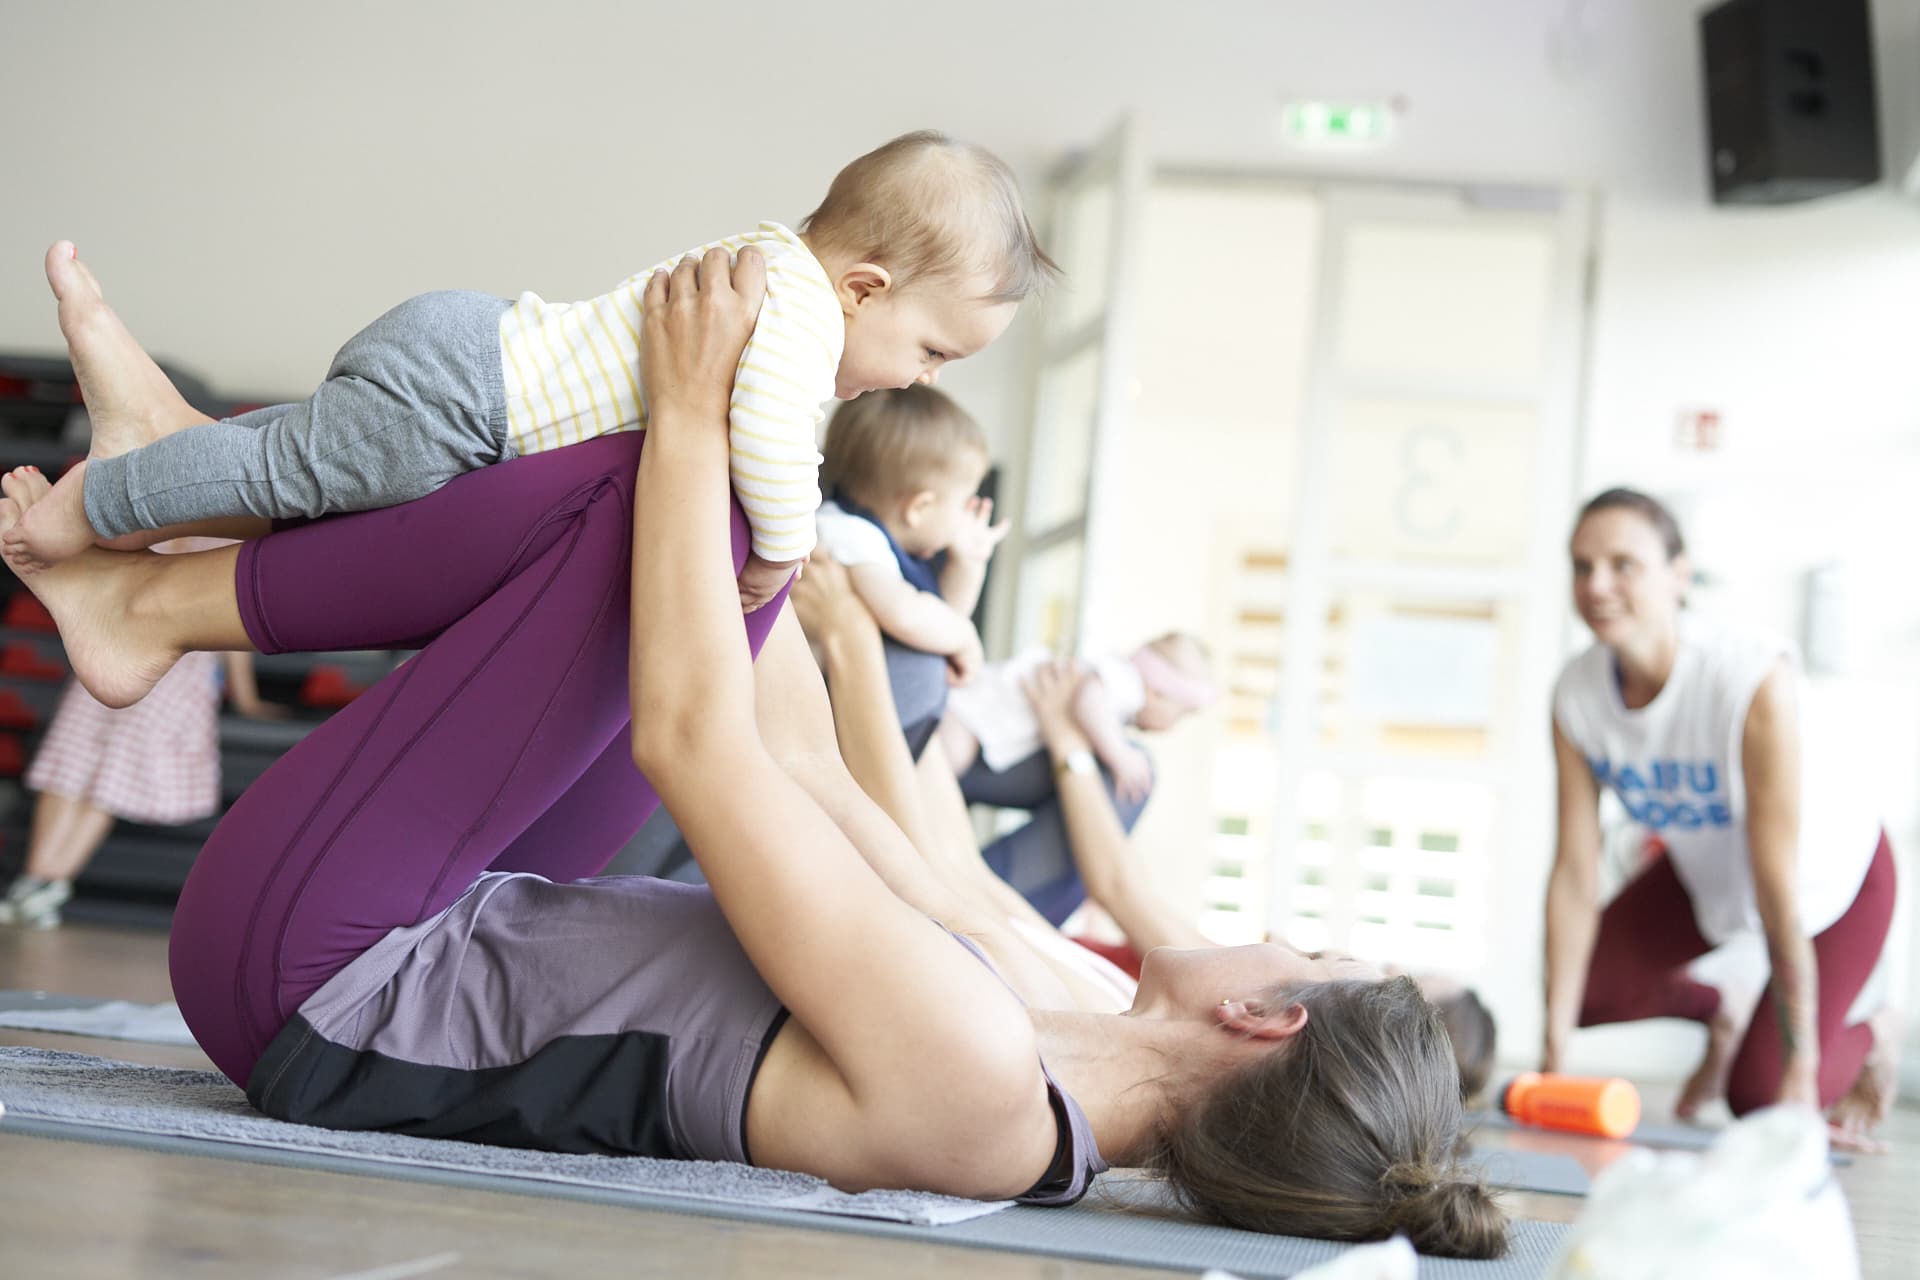 A mother with baby in Mother & Child class at the gym